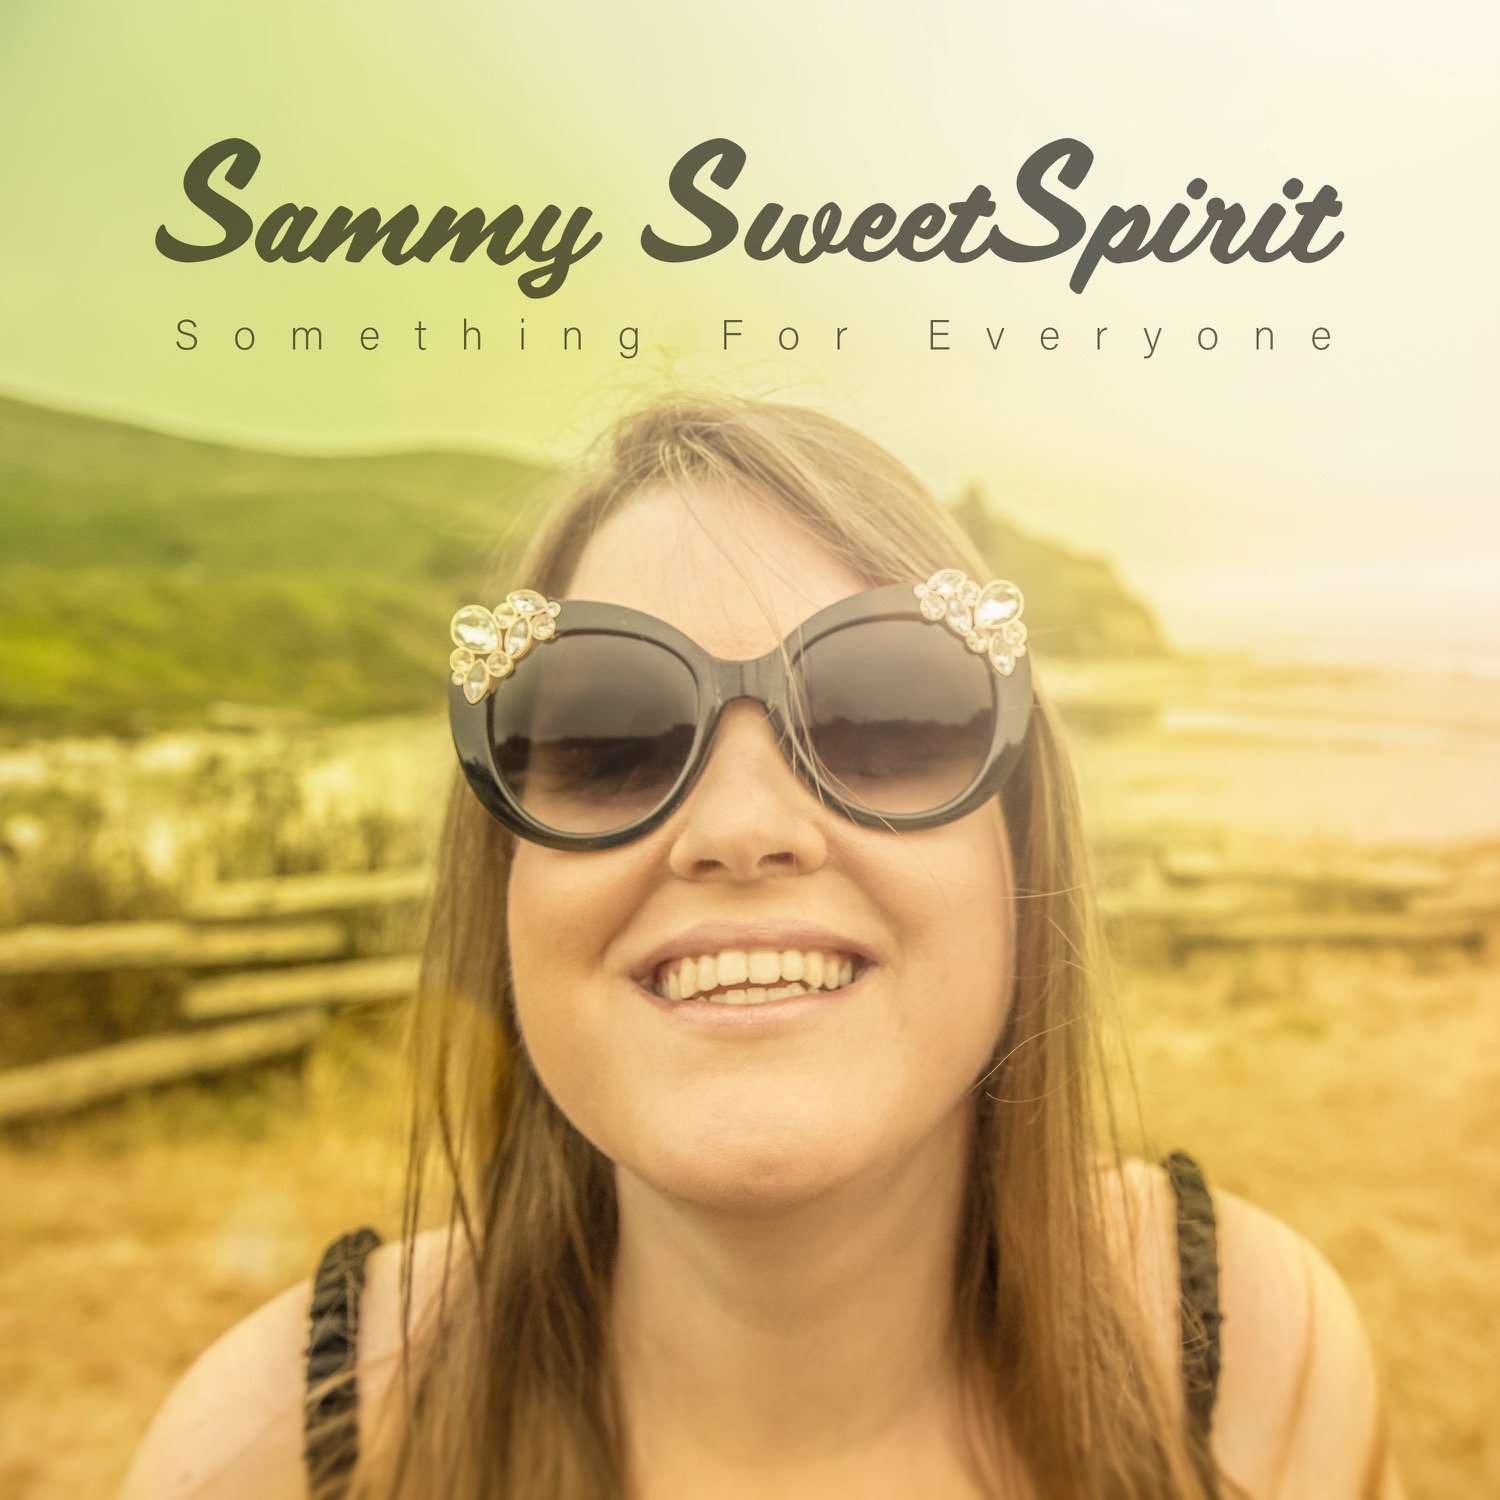 Cover art for 'Sammy SweetSpirit' album titled 'Something For Everyone.' The background has a soft, warm yellow gradient blending into light green, giving a serene outdoor atmosphere. At the top, centered, is the text 'Sammy SweetSpirit' in dark, elegant, cursive font, followed by 'Something For Everyone' in smaller, black, uppercase letters.

The main subject, Sammy SweetSpirit, is positioned in the center of the image. She is smiling brightly, wearing large, round black sunglasses adorned with decorative floral designs at the corners. Her light brown hair falls naturally over her shoulders. The background features a blurred landscape of green hills and a wooden fence, with a sandy area in the foreground, suggesting a coastal or countryside setting. The overall feel of the image is warm and inviting, emphasizing a connection to nature and a sense of joy and openness.